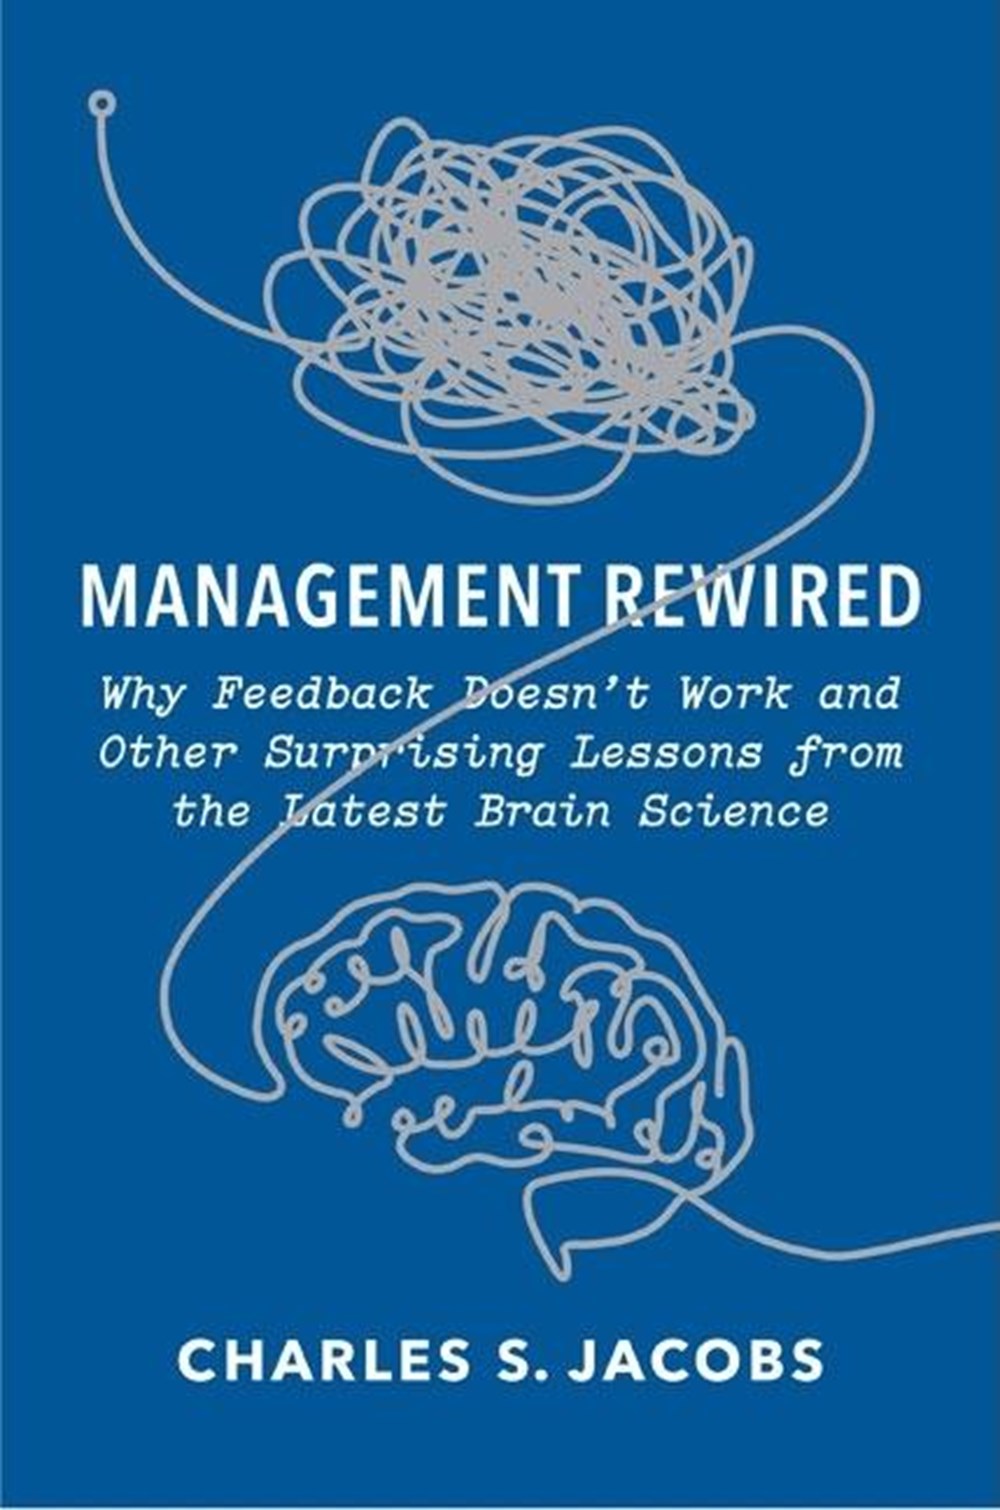 Management Rewired: Why Feedback Doesn't Work and Other Surprising Lessons from the Latest Brain Sci